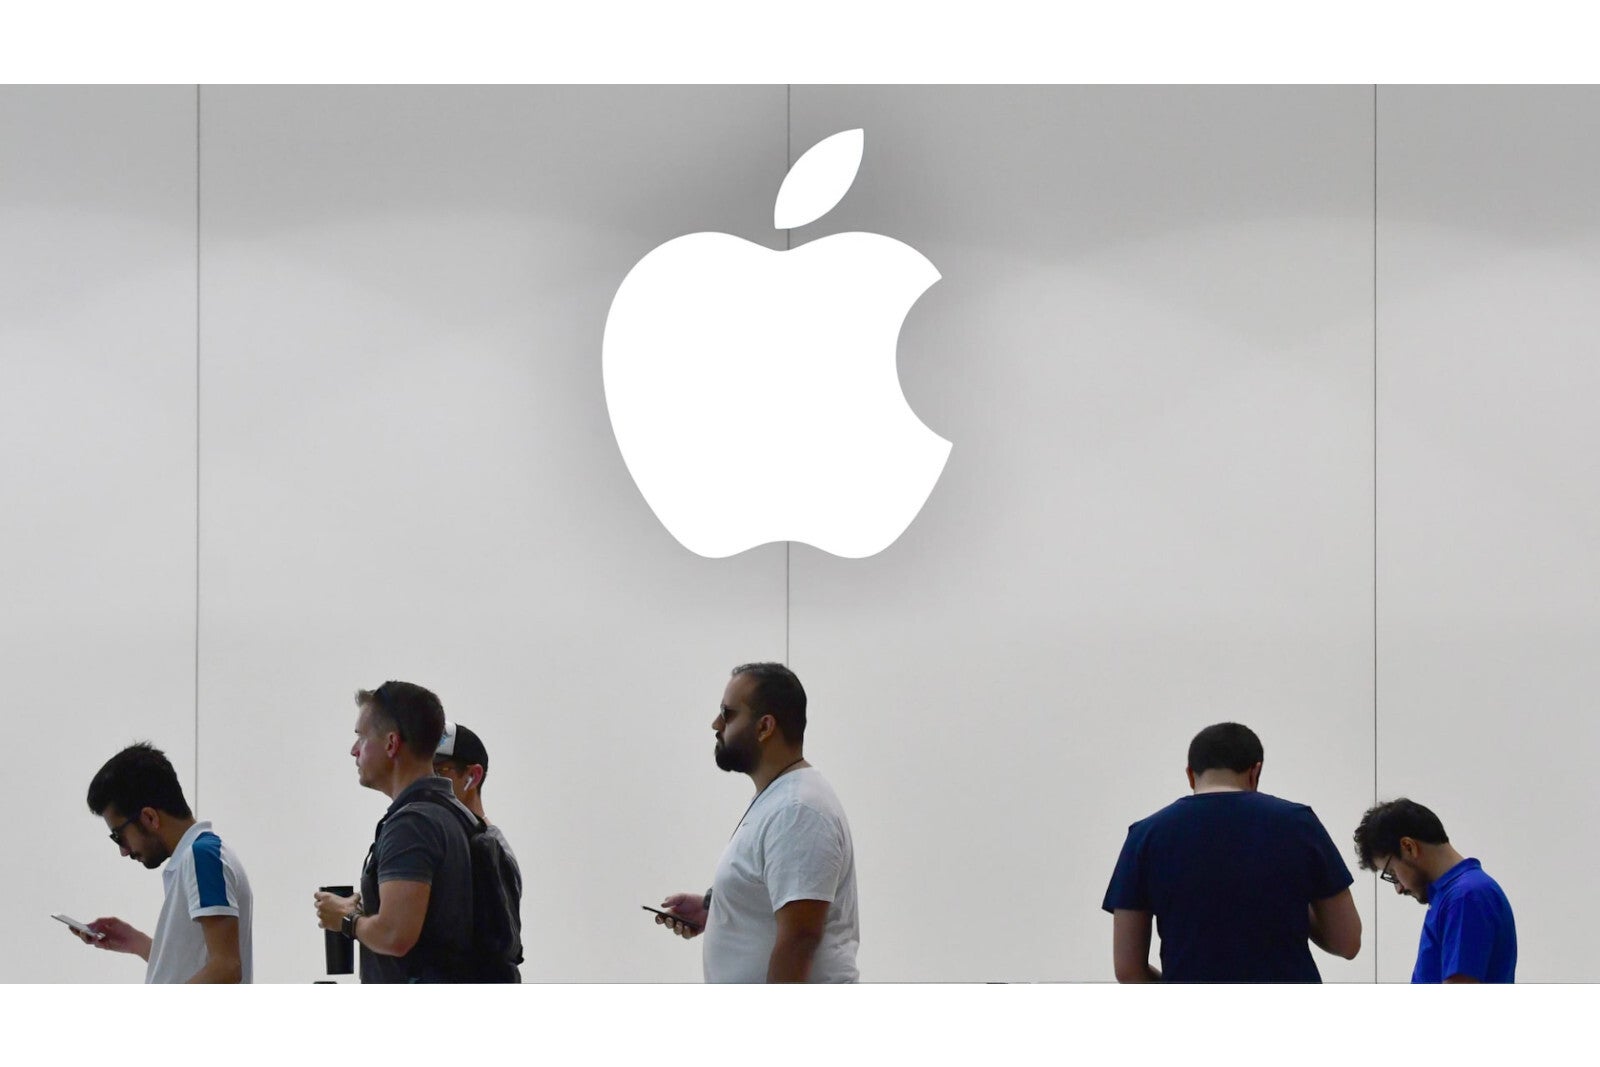 Apple is the world’s most valuable brand in 2022